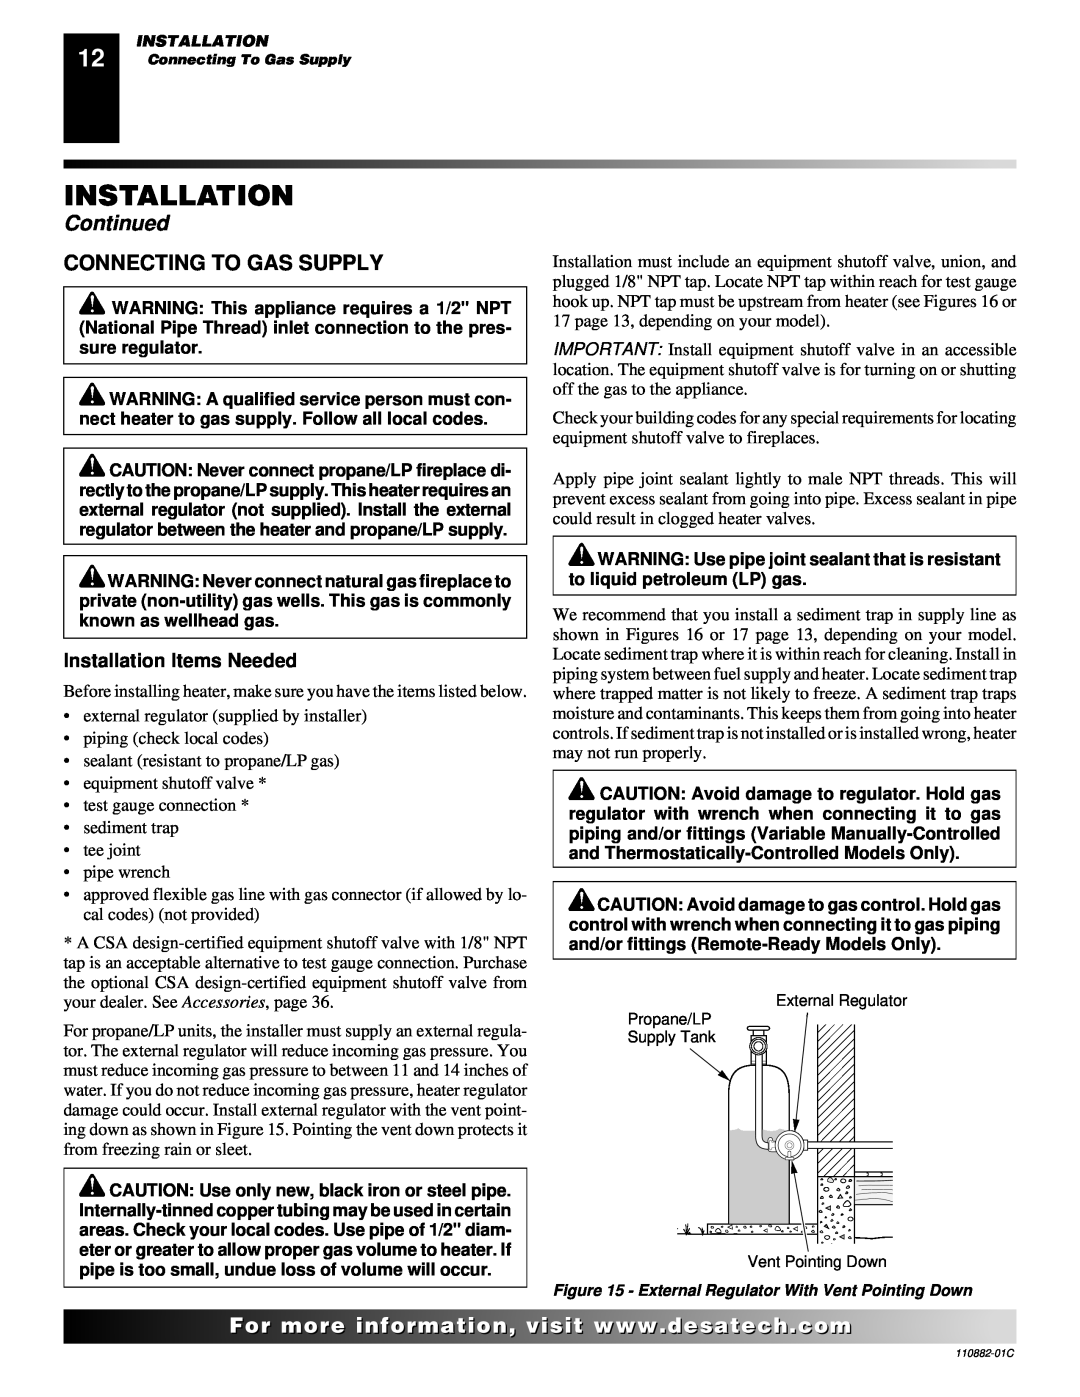 Desa 30, R, V, T installation manual Continued, Connecting To Gas Supply, Installation Items Needed 